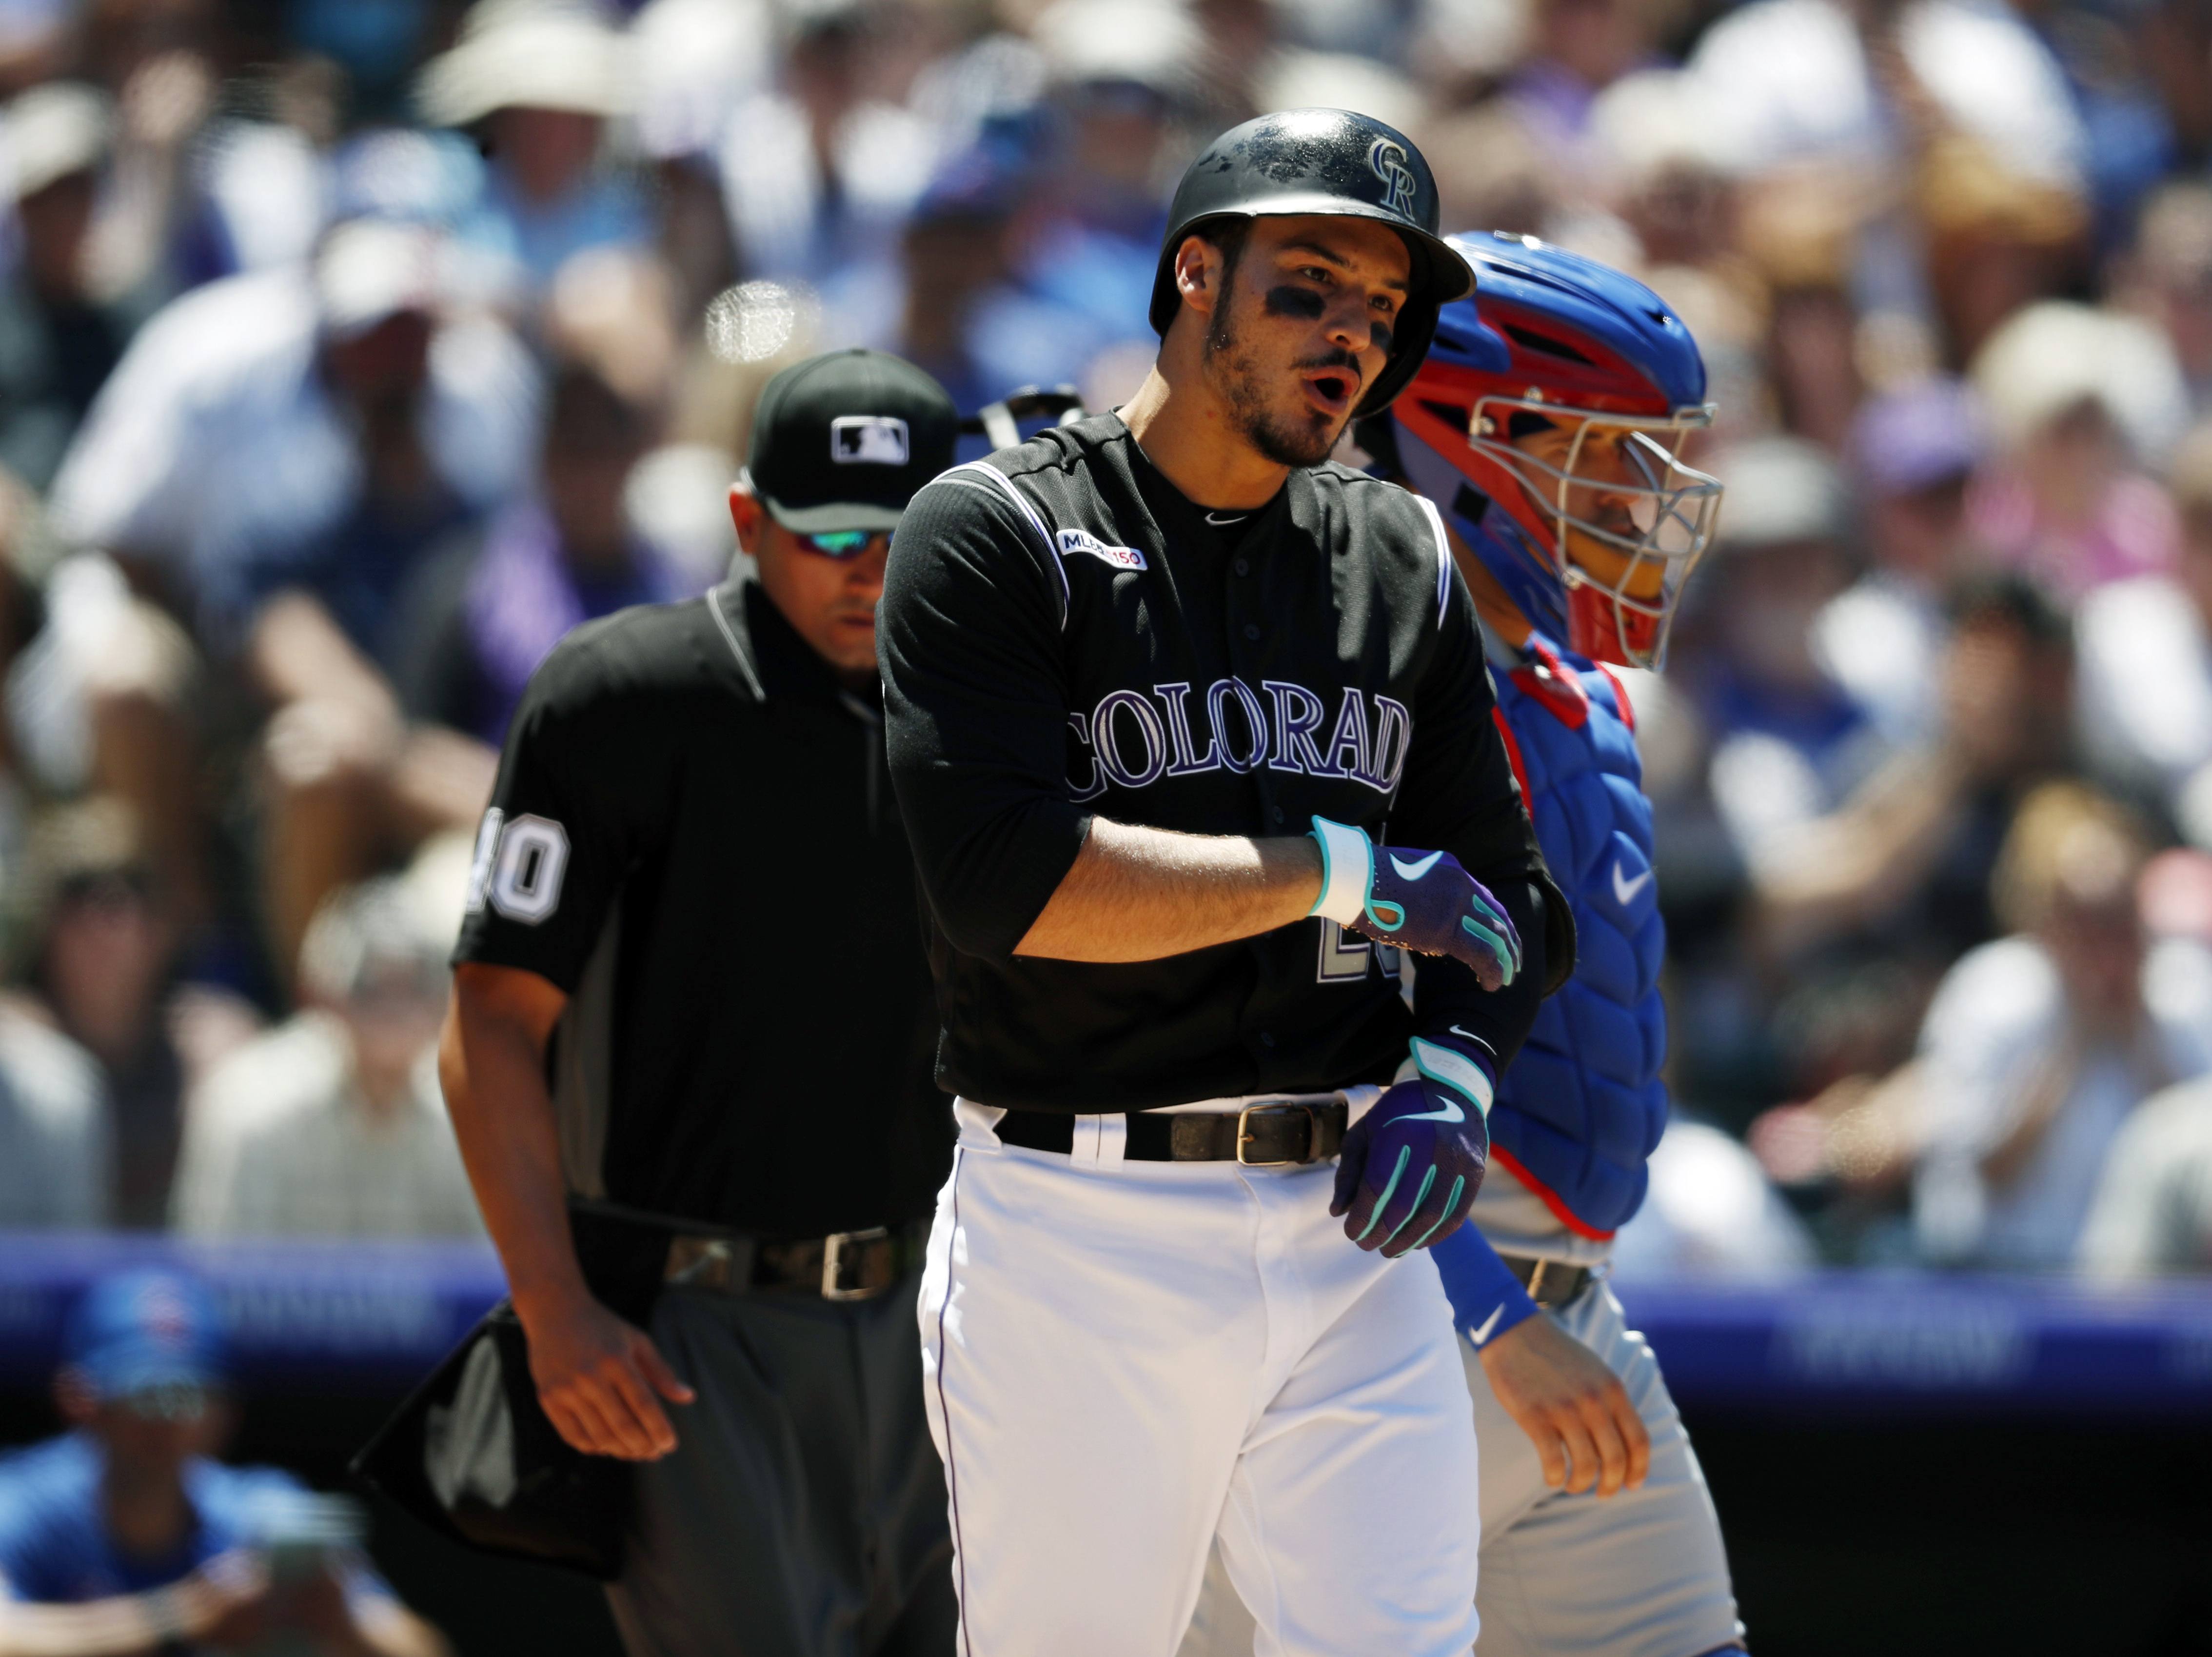 Arenado in the lineup day after being hit in arm by pitch